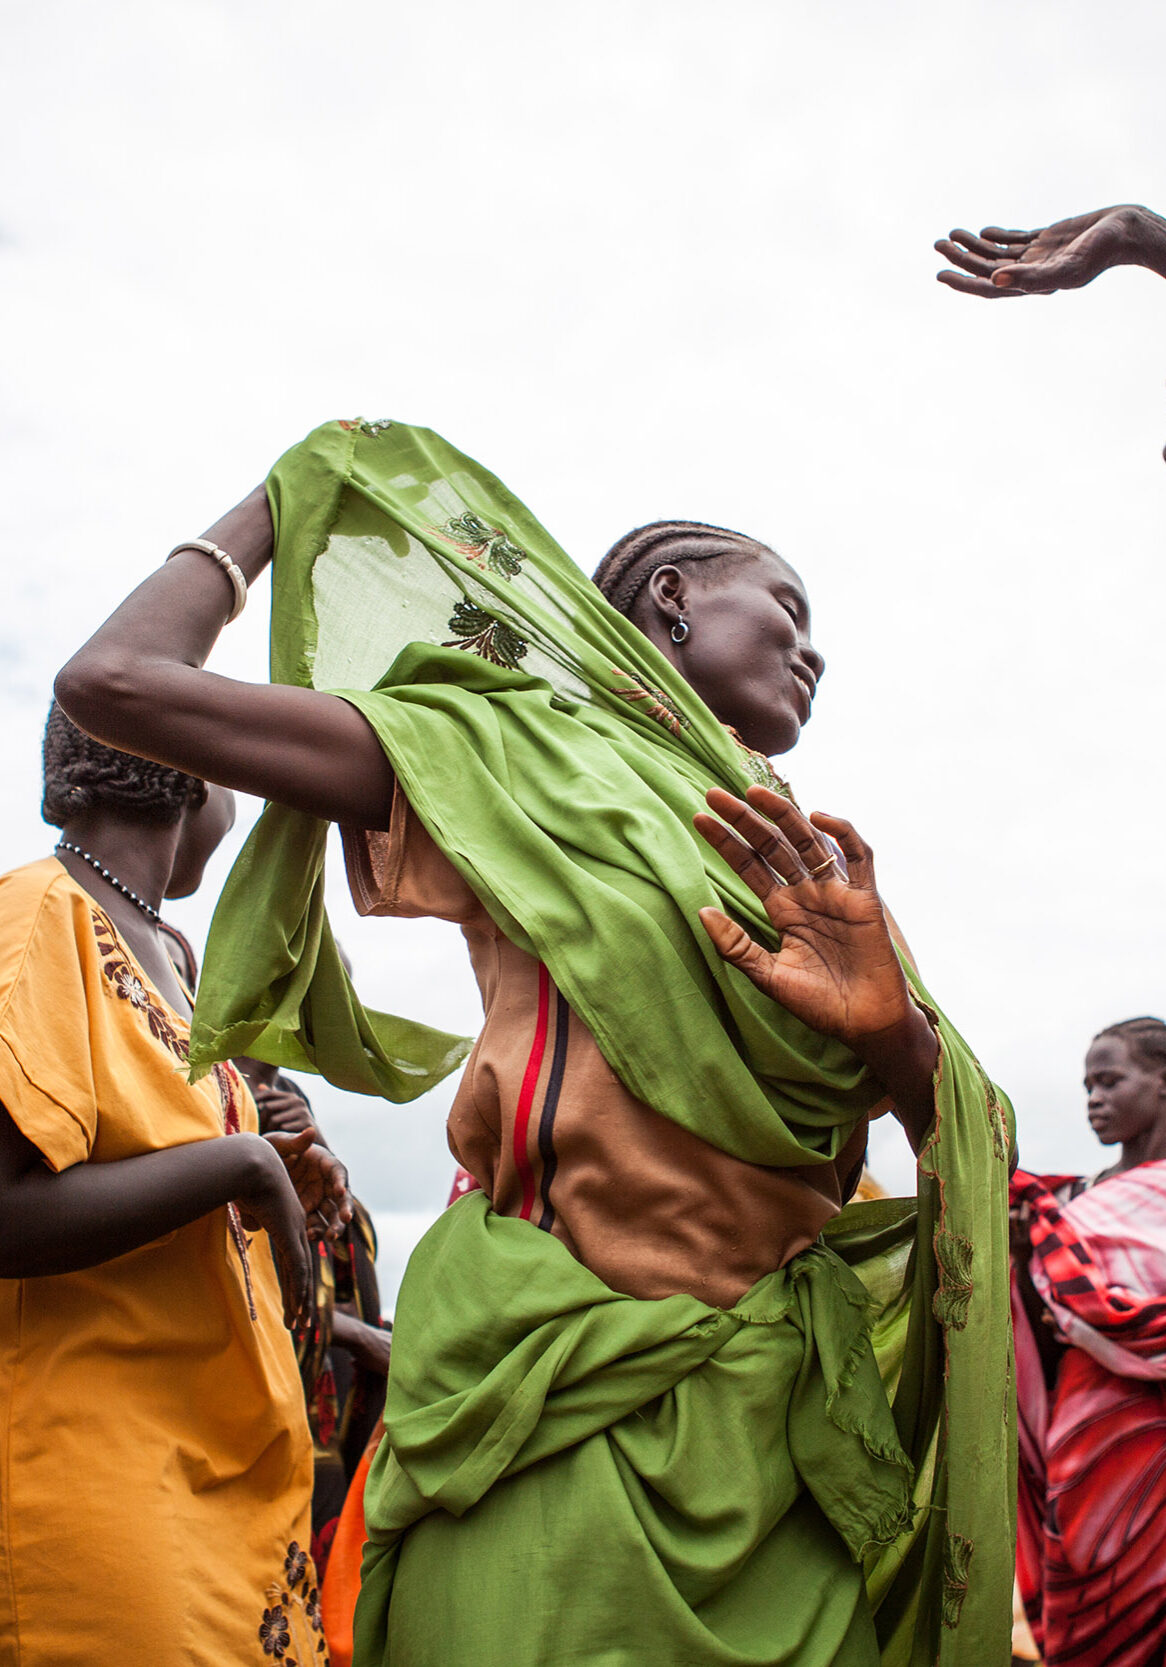 South Sudan, Western Bahr el Ghazal State, near the town of Wau,  July 31, 2013. During the occasion of a South Sudan Red Cross (SSRC)Emergency Action Team (EAT) simulation, local communities come together to celebrate their visitors with traditional songs and dance.